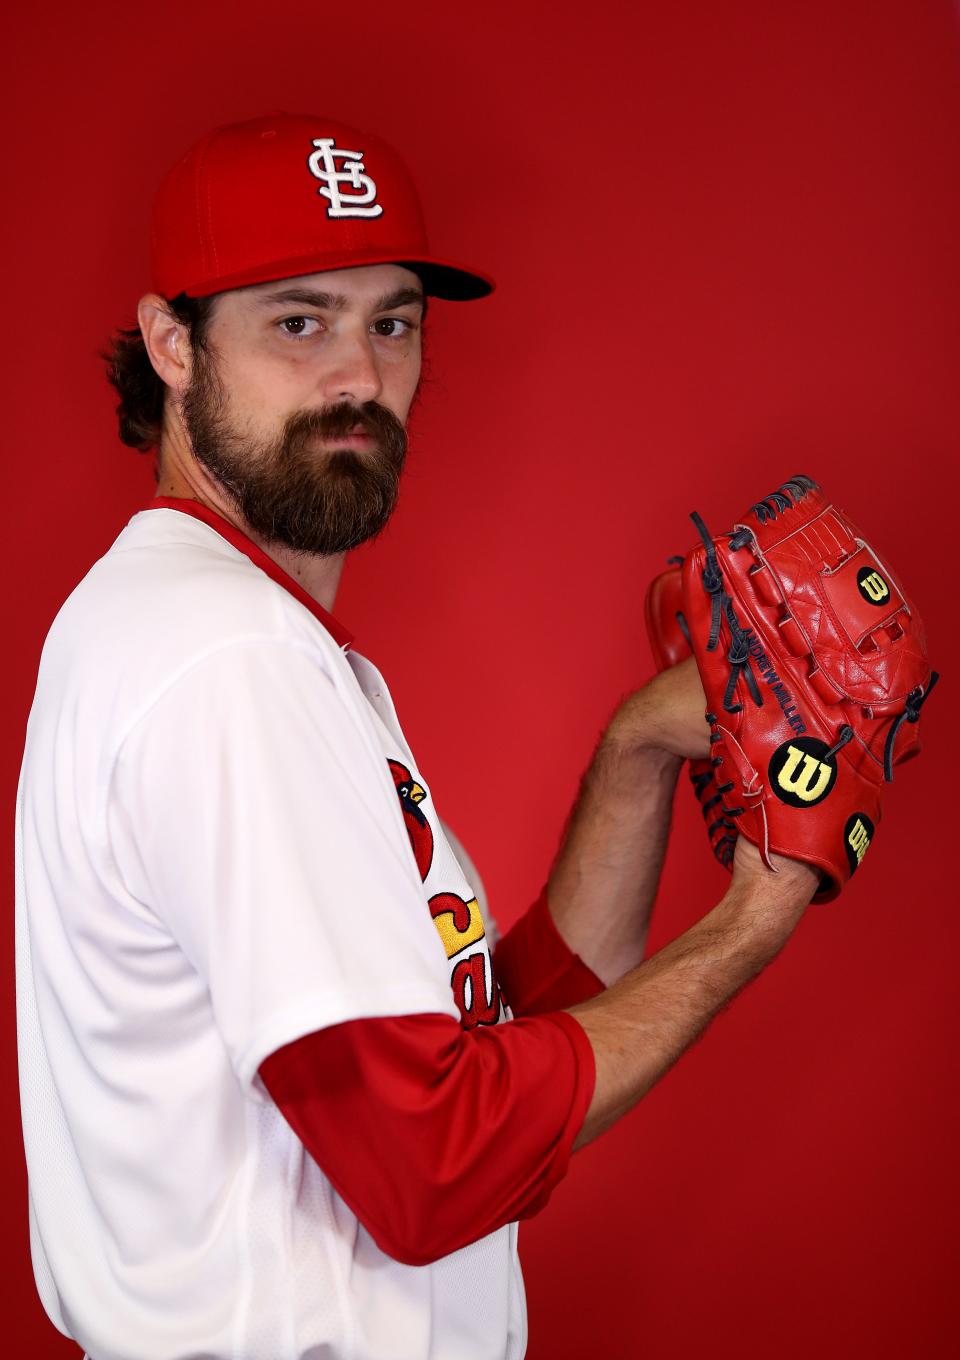 Once, Andrew Miller was a first-round draft pick of the Tigers. Now, he's got a two-year deal to pitch for the St. Louis Cardinals.